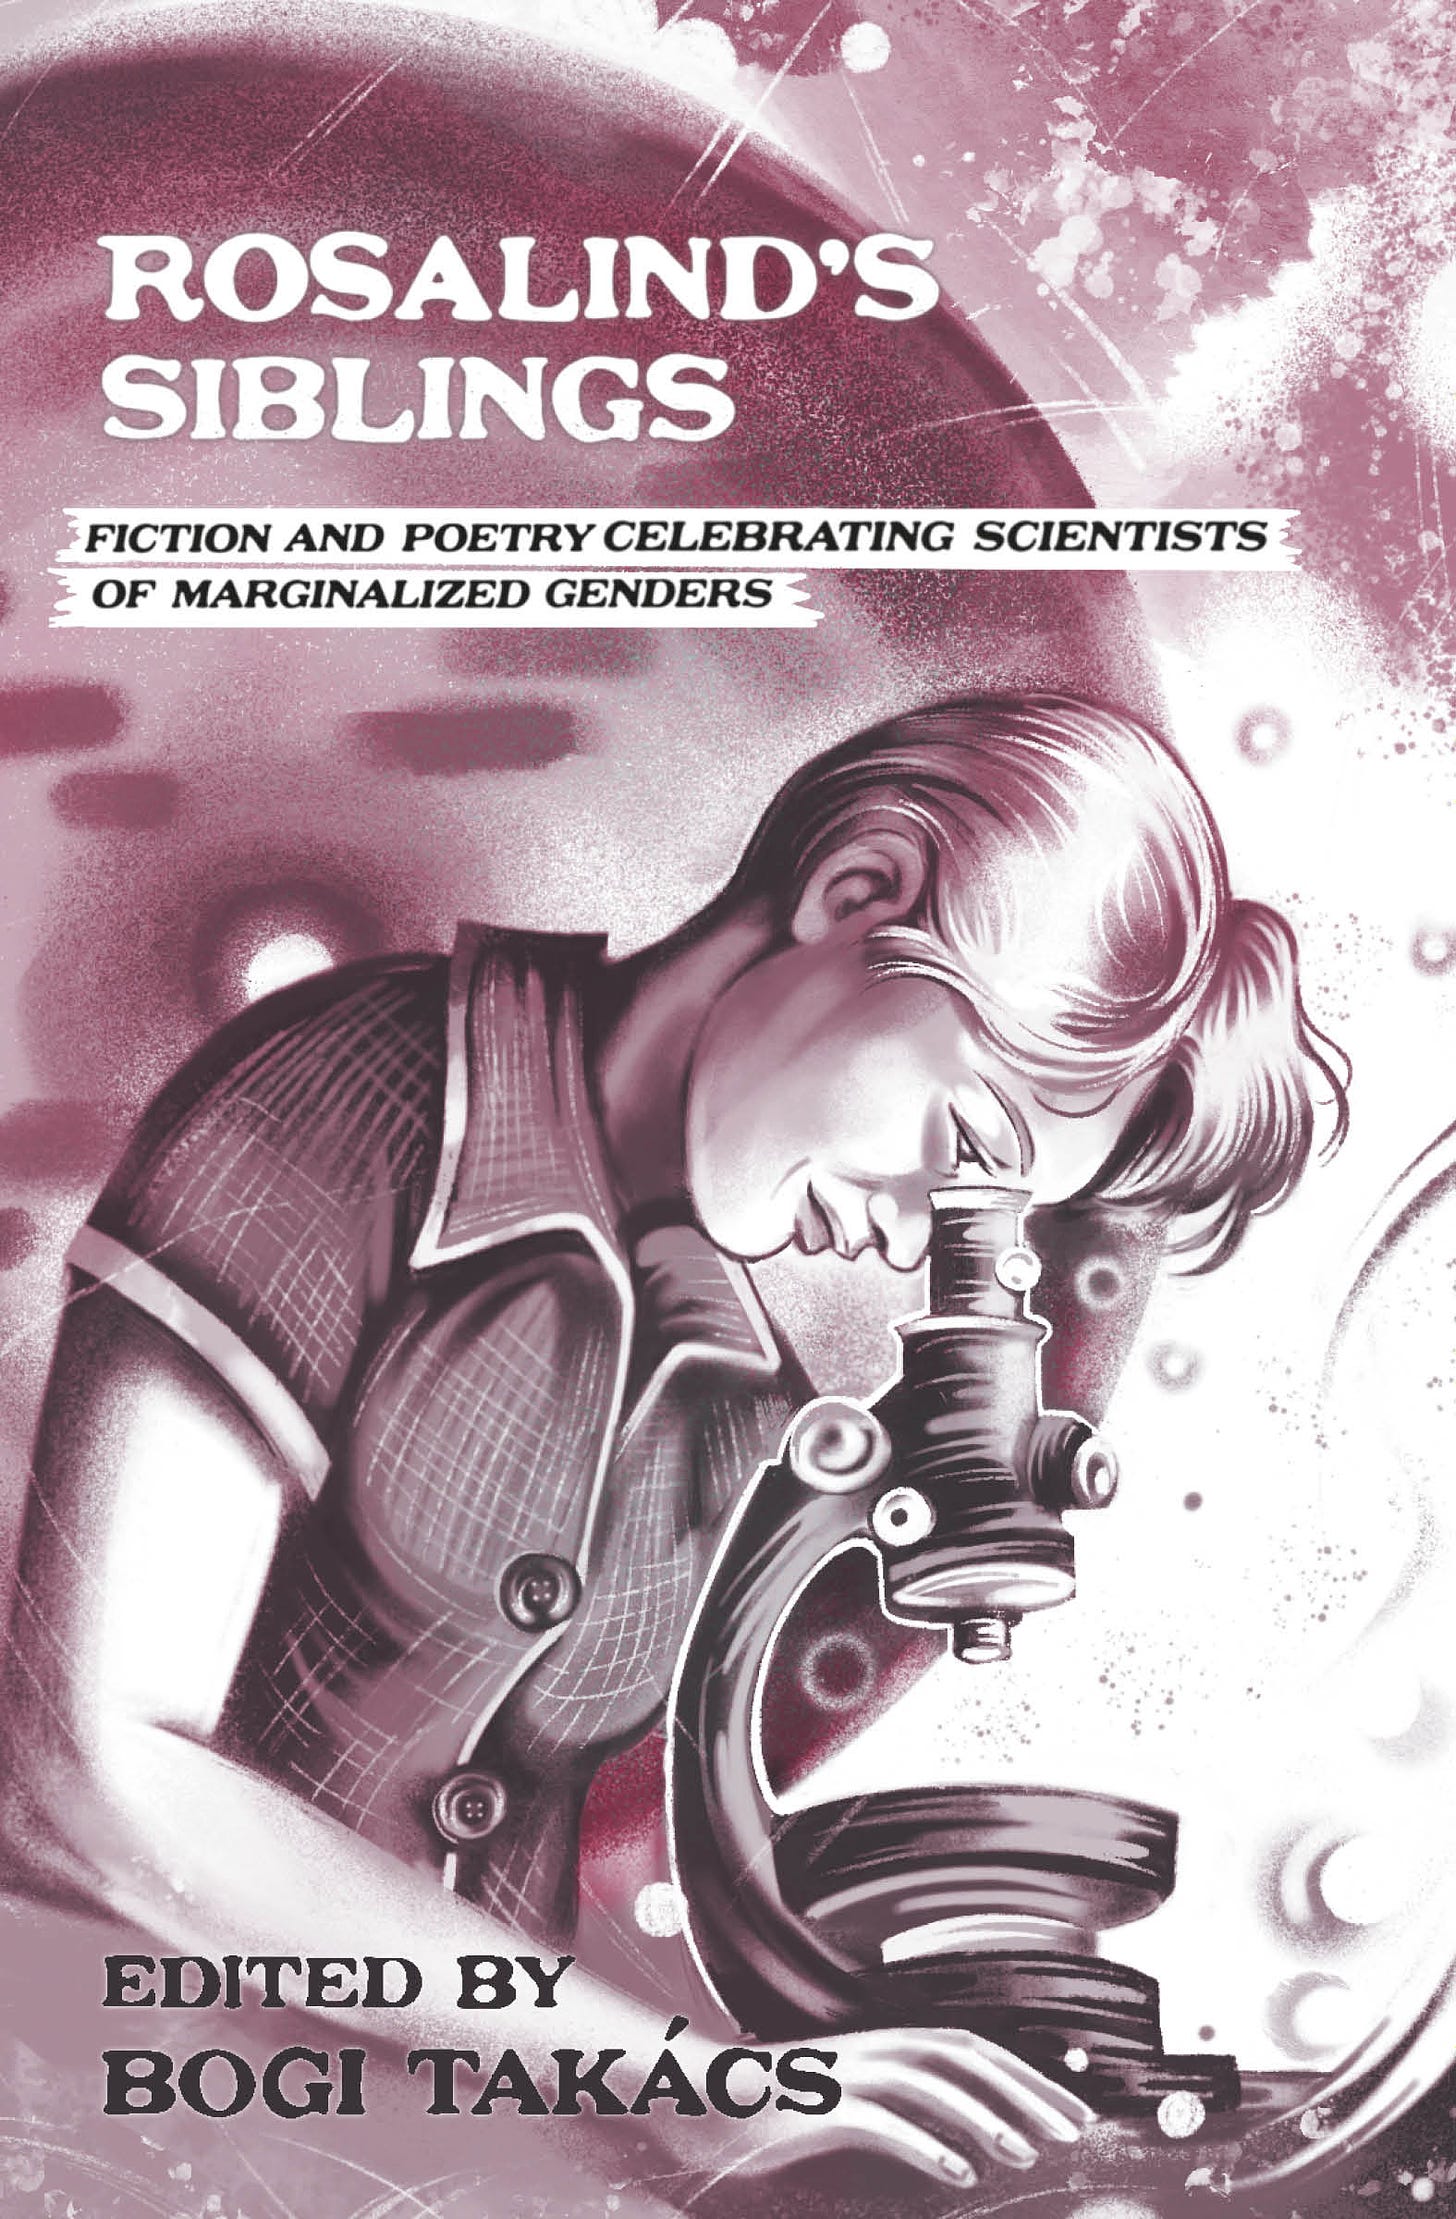 The cover primarily features a grayscale illustration of a photograph of Rosalind Franklin peering over a microscope, in a short-sleeved collared shirt, with large, playful, buttons, and with short hair, longer and tousled in front. In the background is an illustrated representation grayscale image of Dr. Franklin's photograph of the double-helical structure of DNA. All the images are tinted a rich maroon. Cover text says: Rosalind's Siblings: Fiction and Poetry Celebrating Scientists of Marginalized Genders. Edited by Bogi Takács.